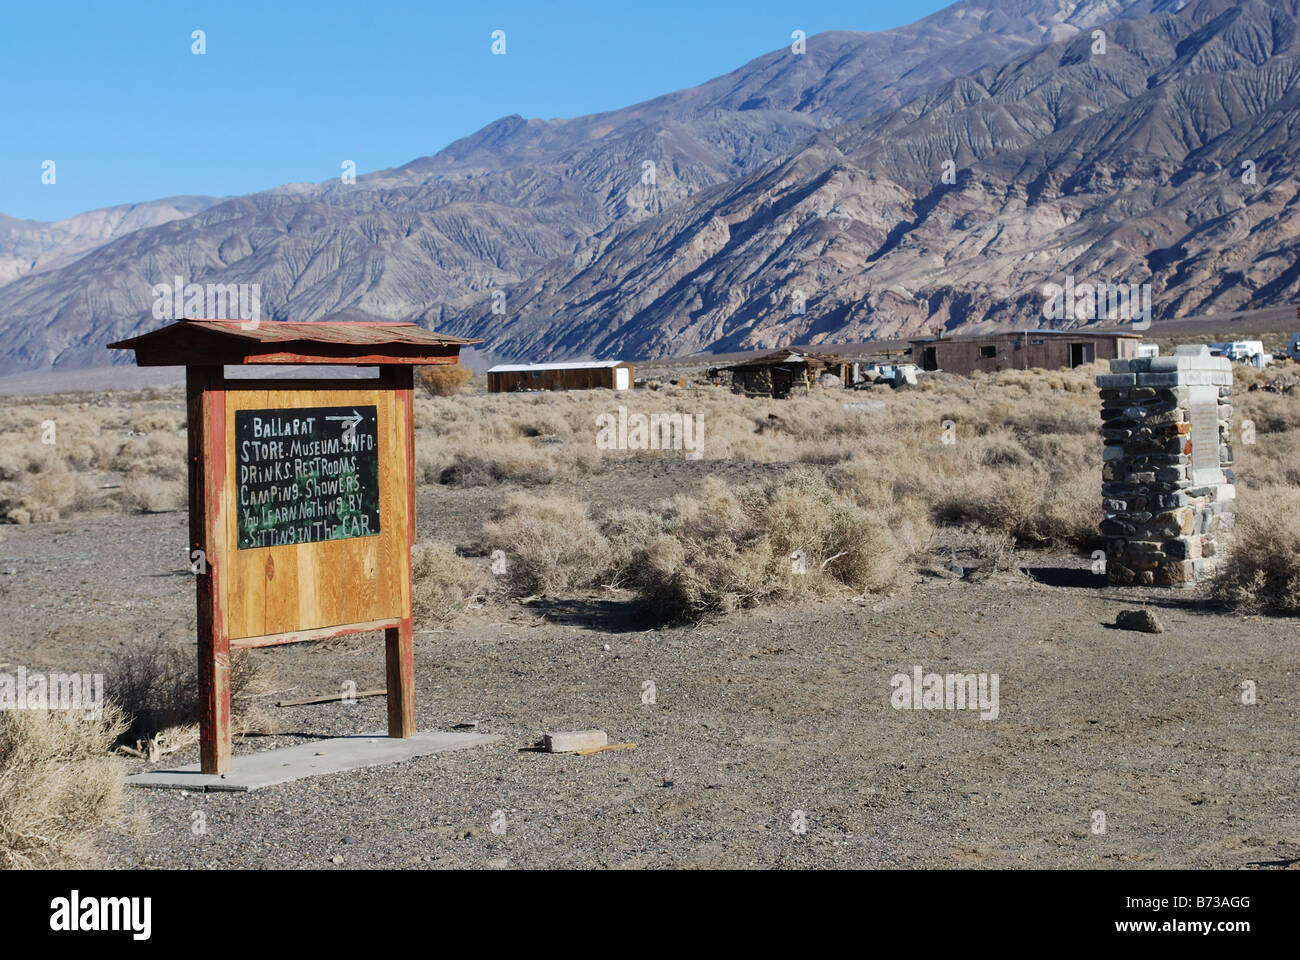 Ballarat a ghost town on the edge of the Panamint Mountains in Death Valley National Park CA USA Stock Photo